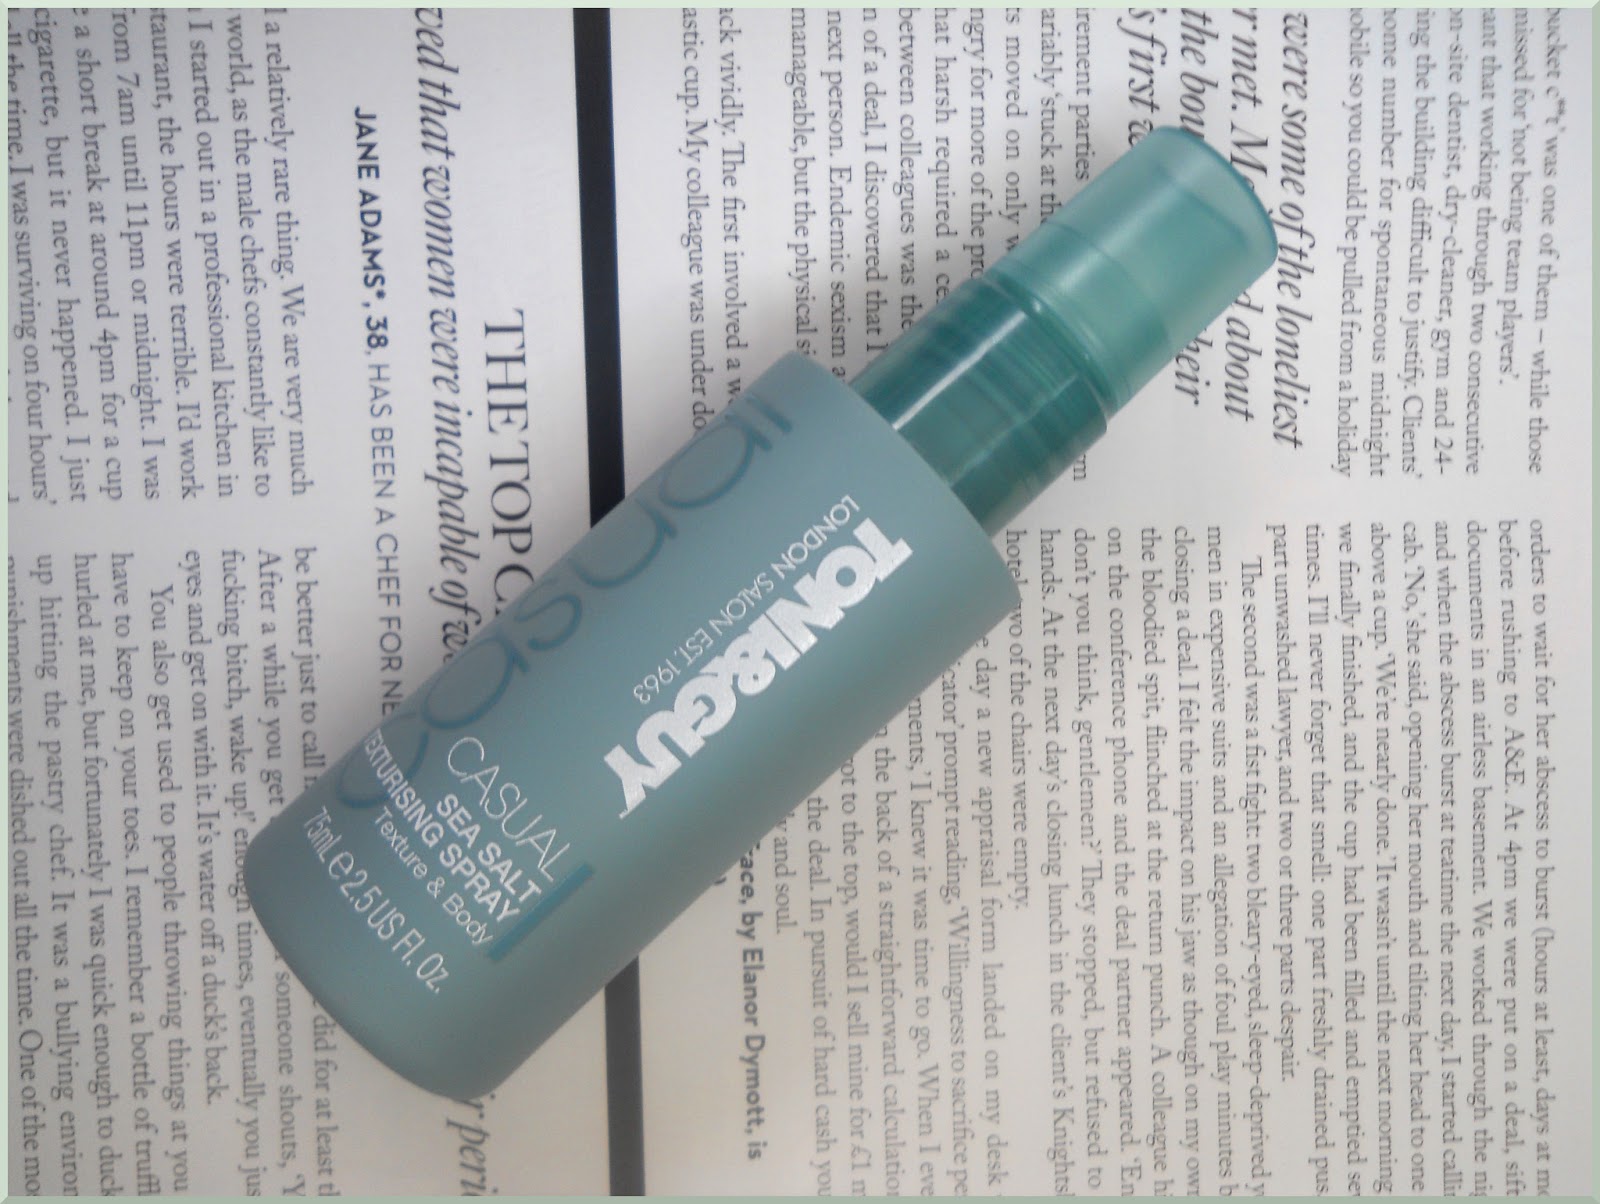 toni and guy rough texturising spray review